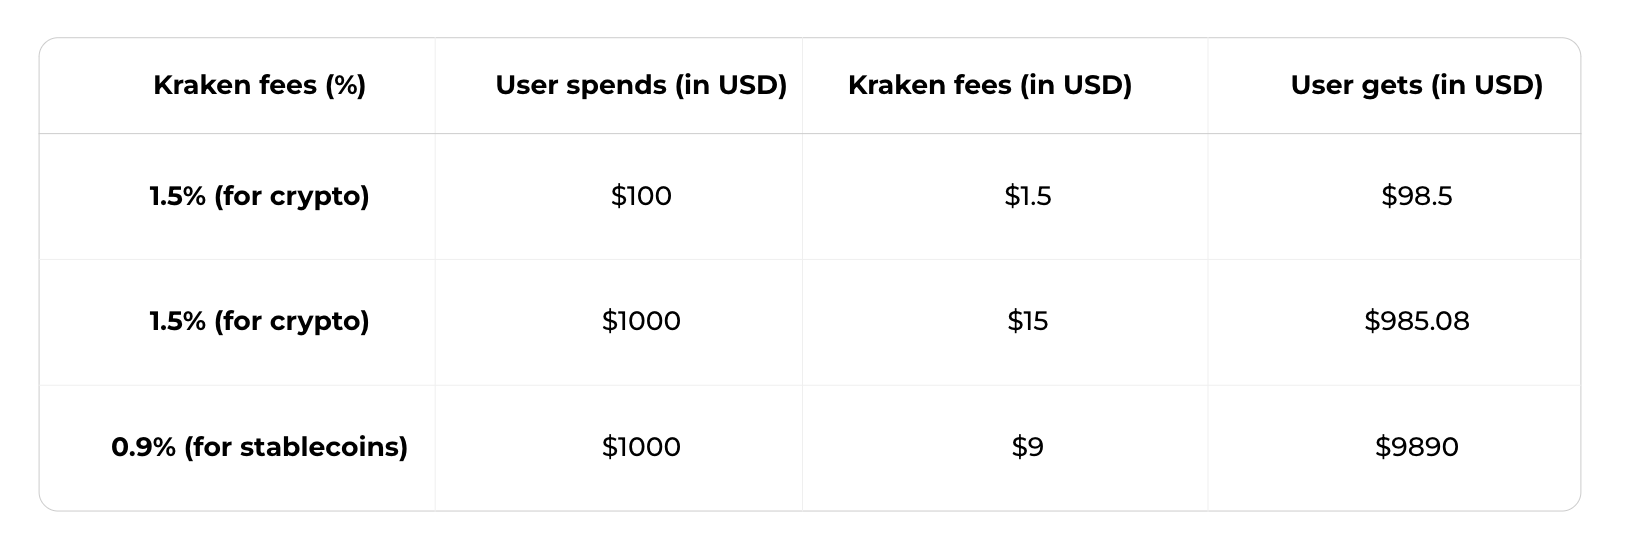 Kraken cuts minimum withdrawal amounts, fees on 'significant' move in bitcoin, ETH prices | Reuters